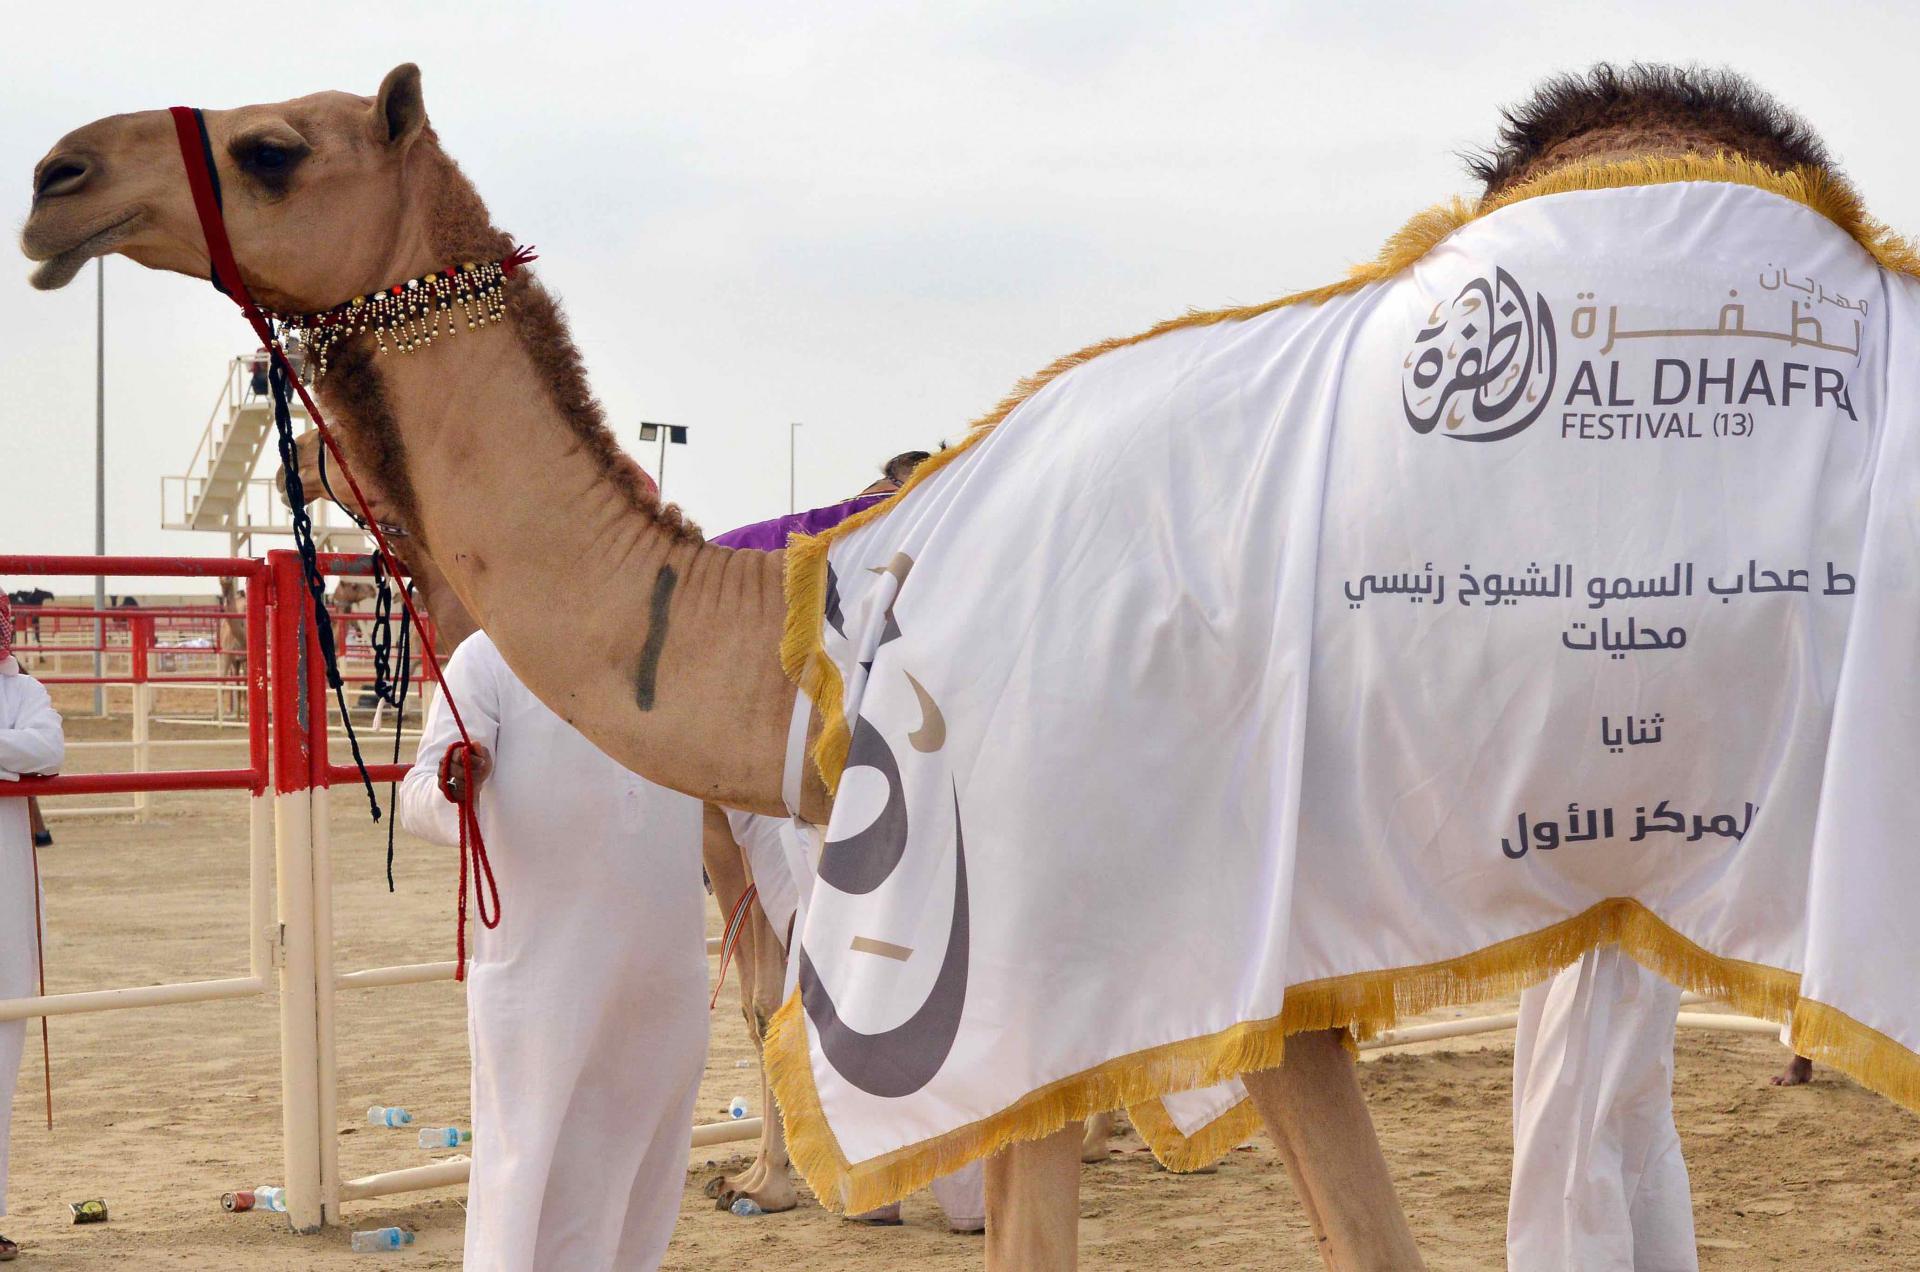 Prize money for camel racing, which was attended by a record number of camel owners, totalled AED16 million alone.